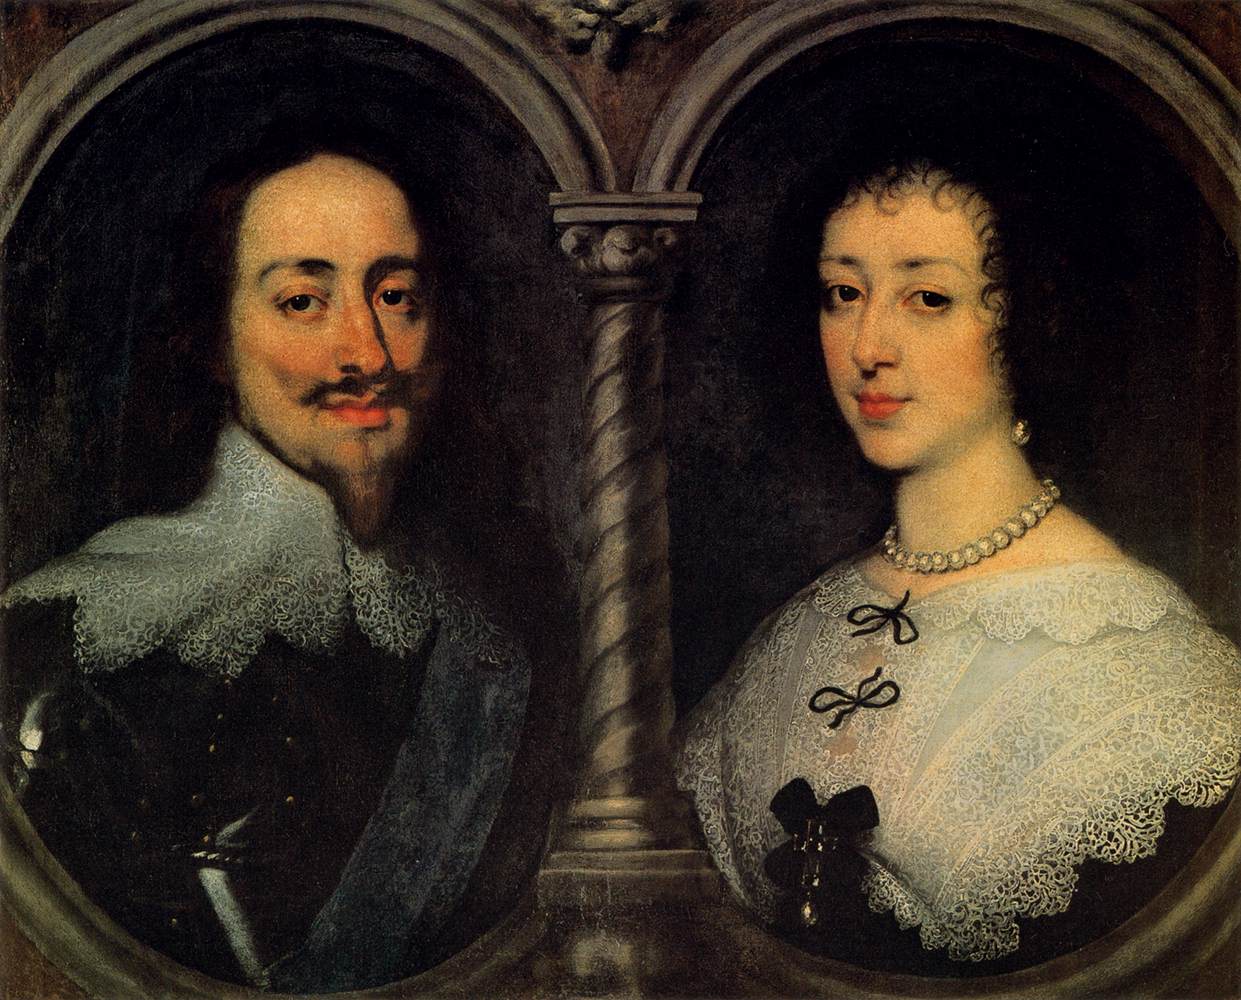 Charles I of England and Henrietta of France